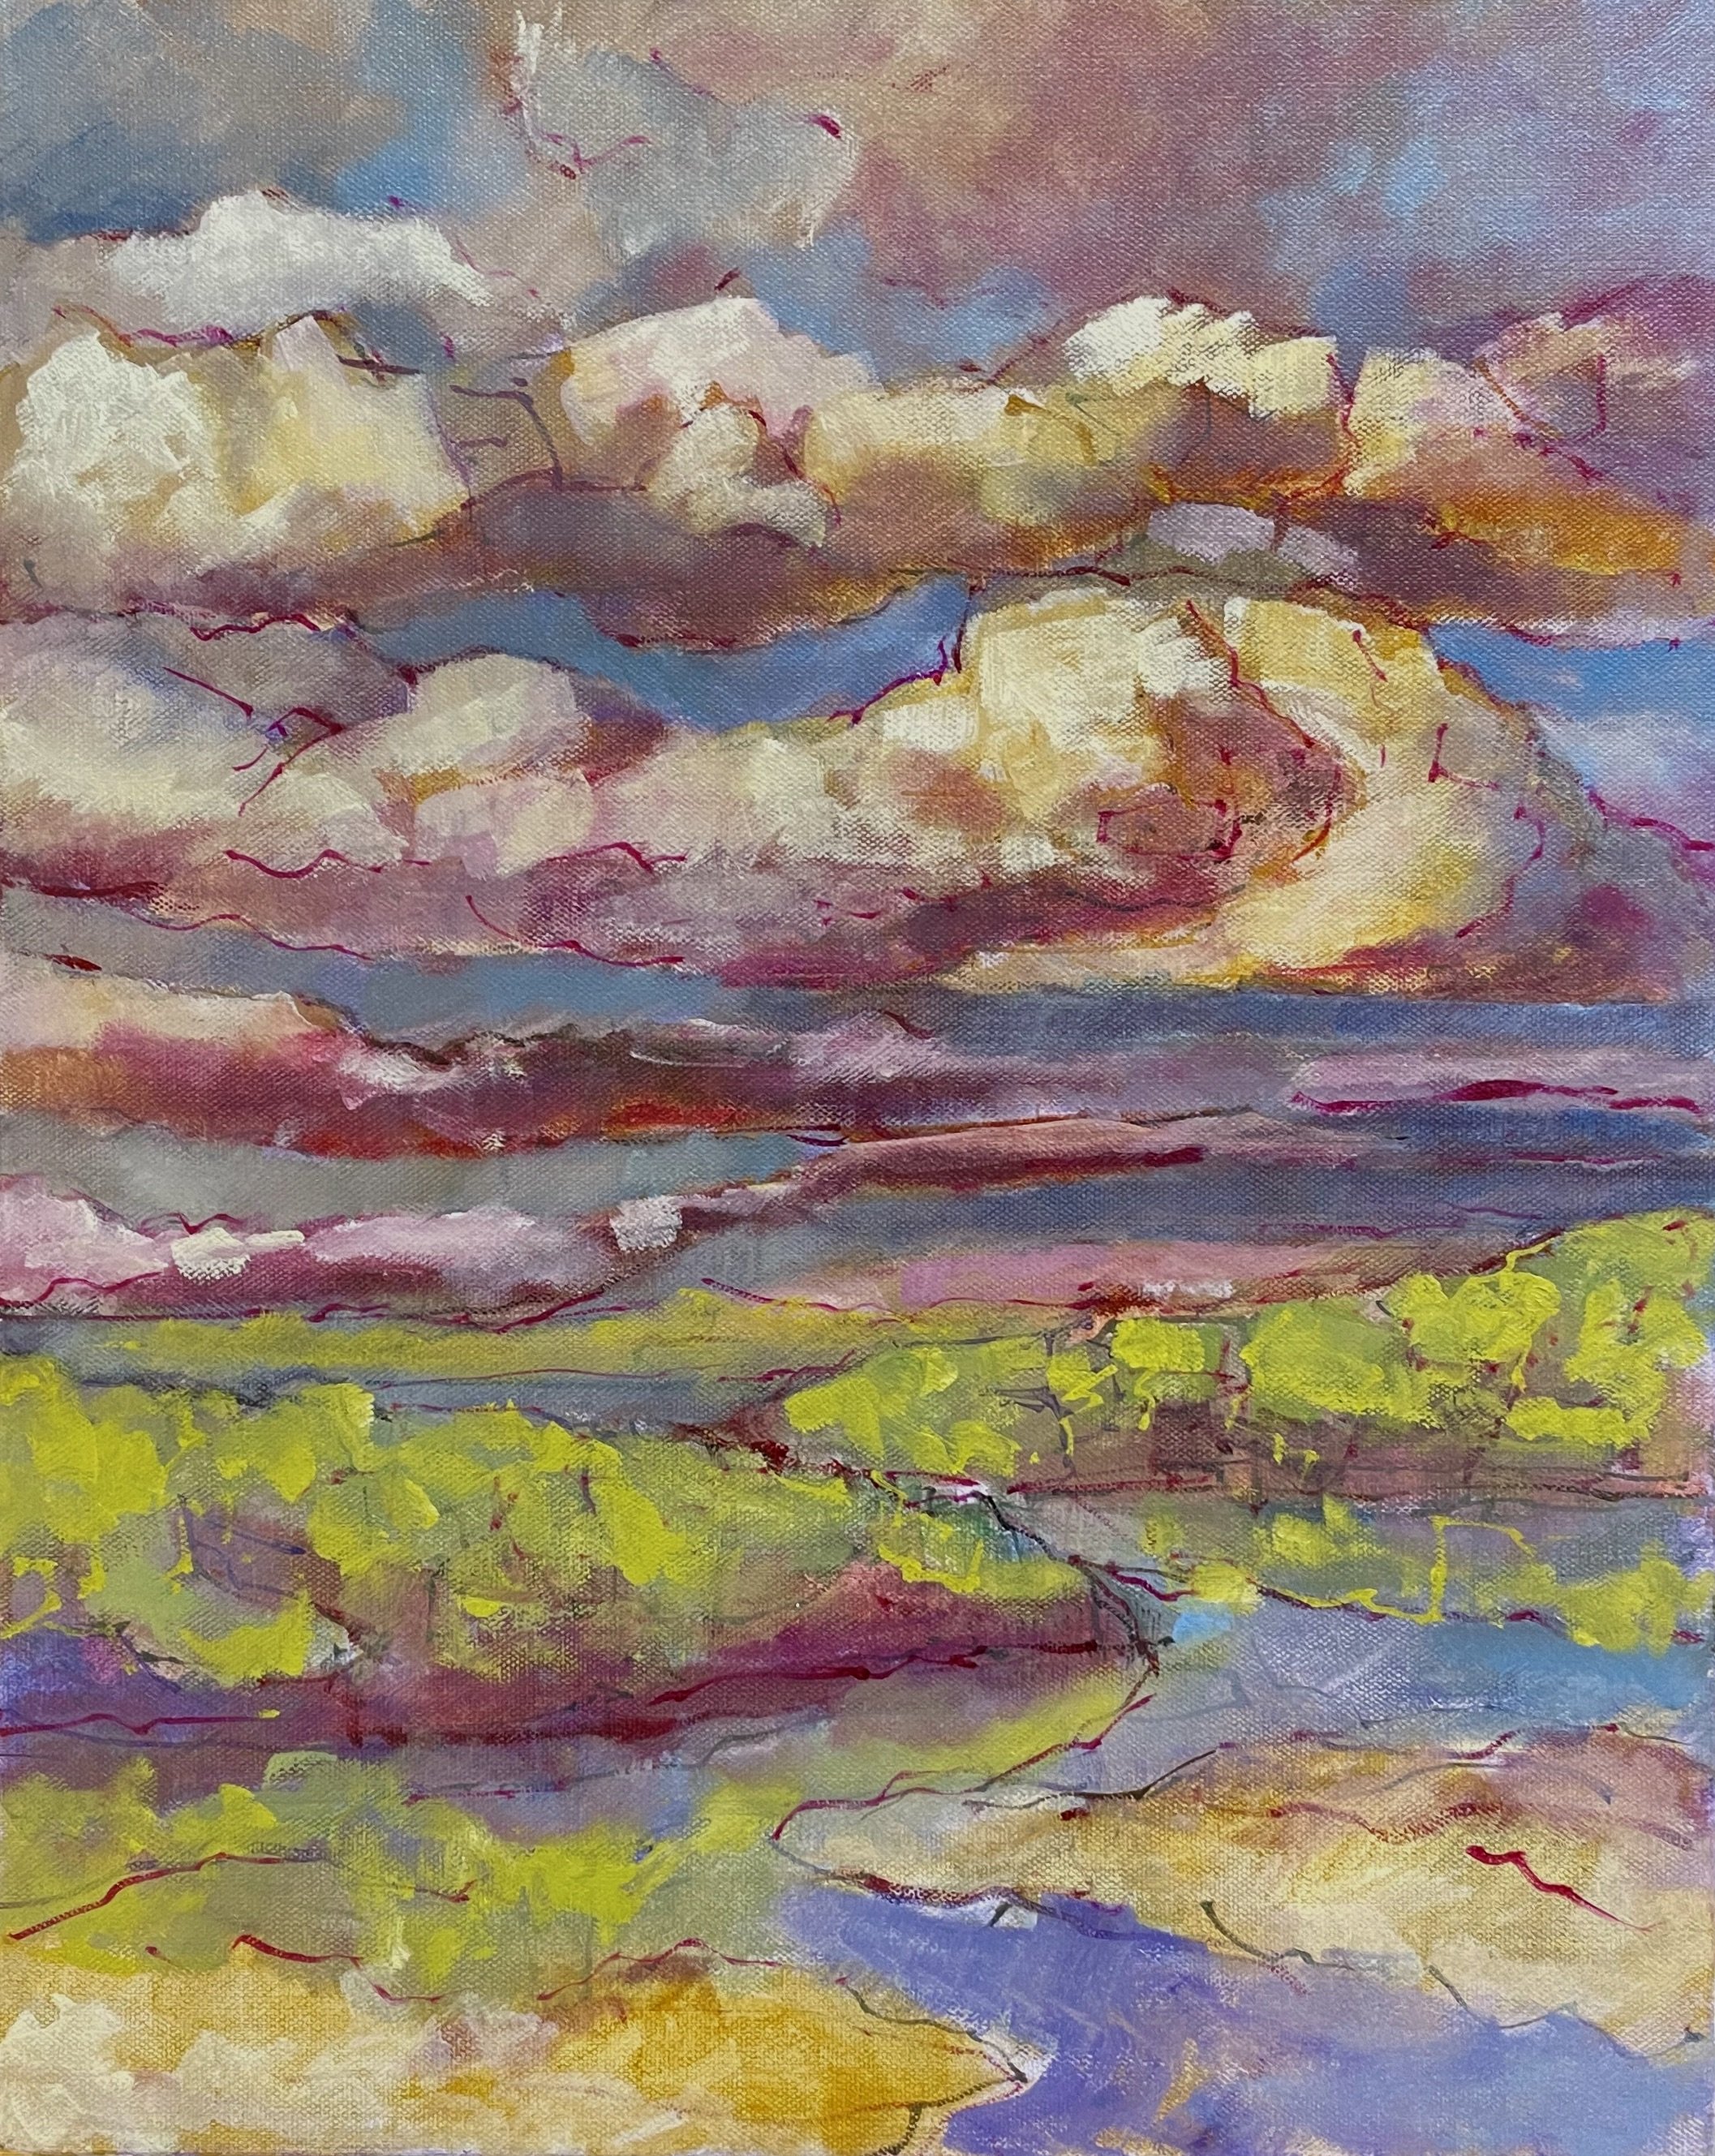 Lake Scape Variation, Oil on Panel, 16 by 20 inches, 2022.